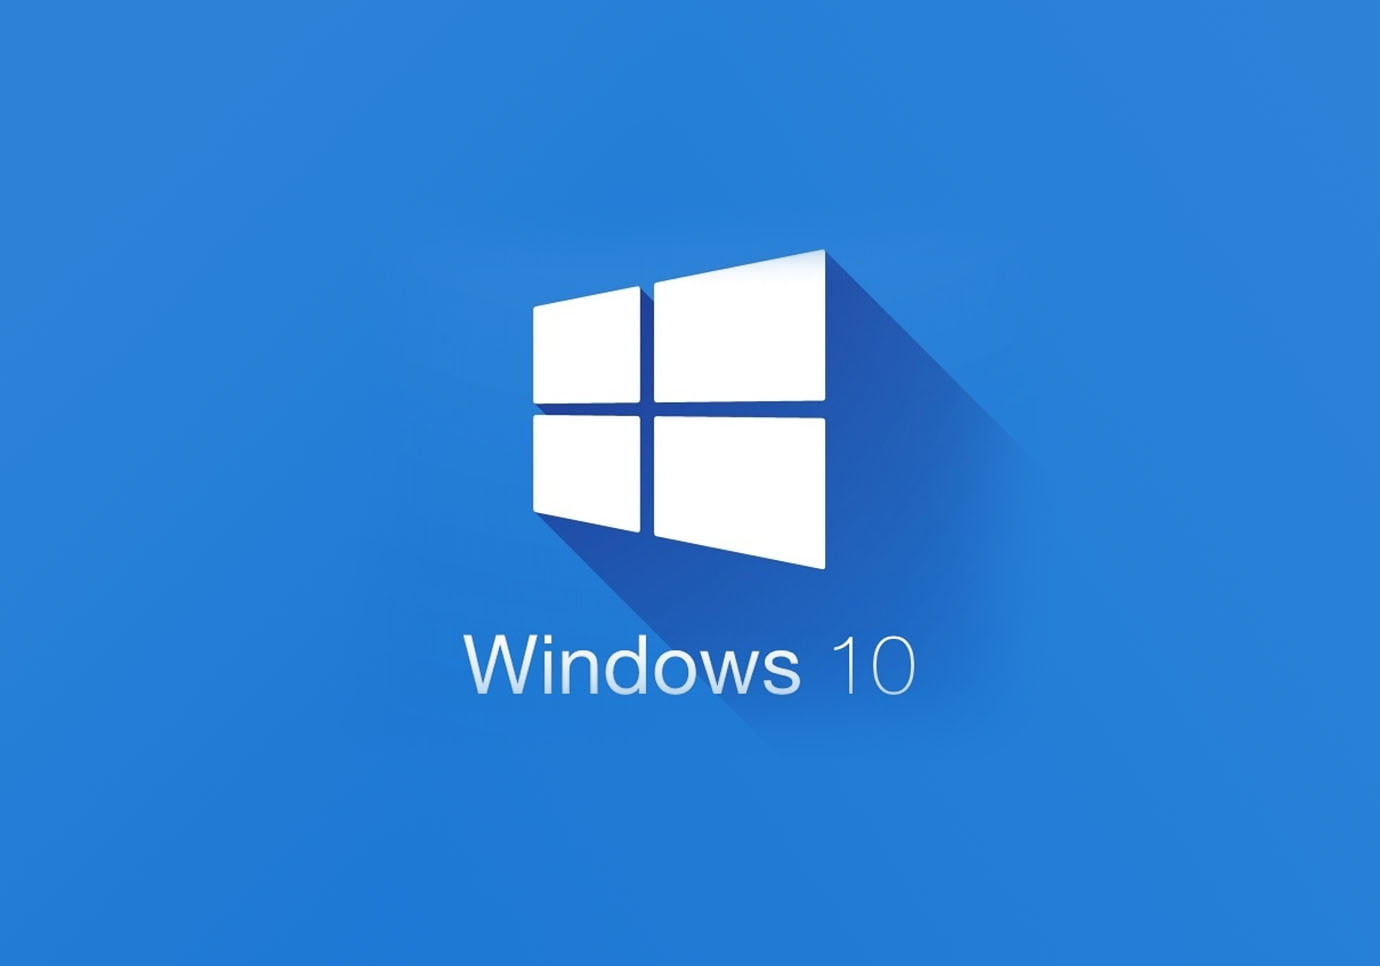 Celebrating the release of Windows 10 – the evolution of the Windows logo